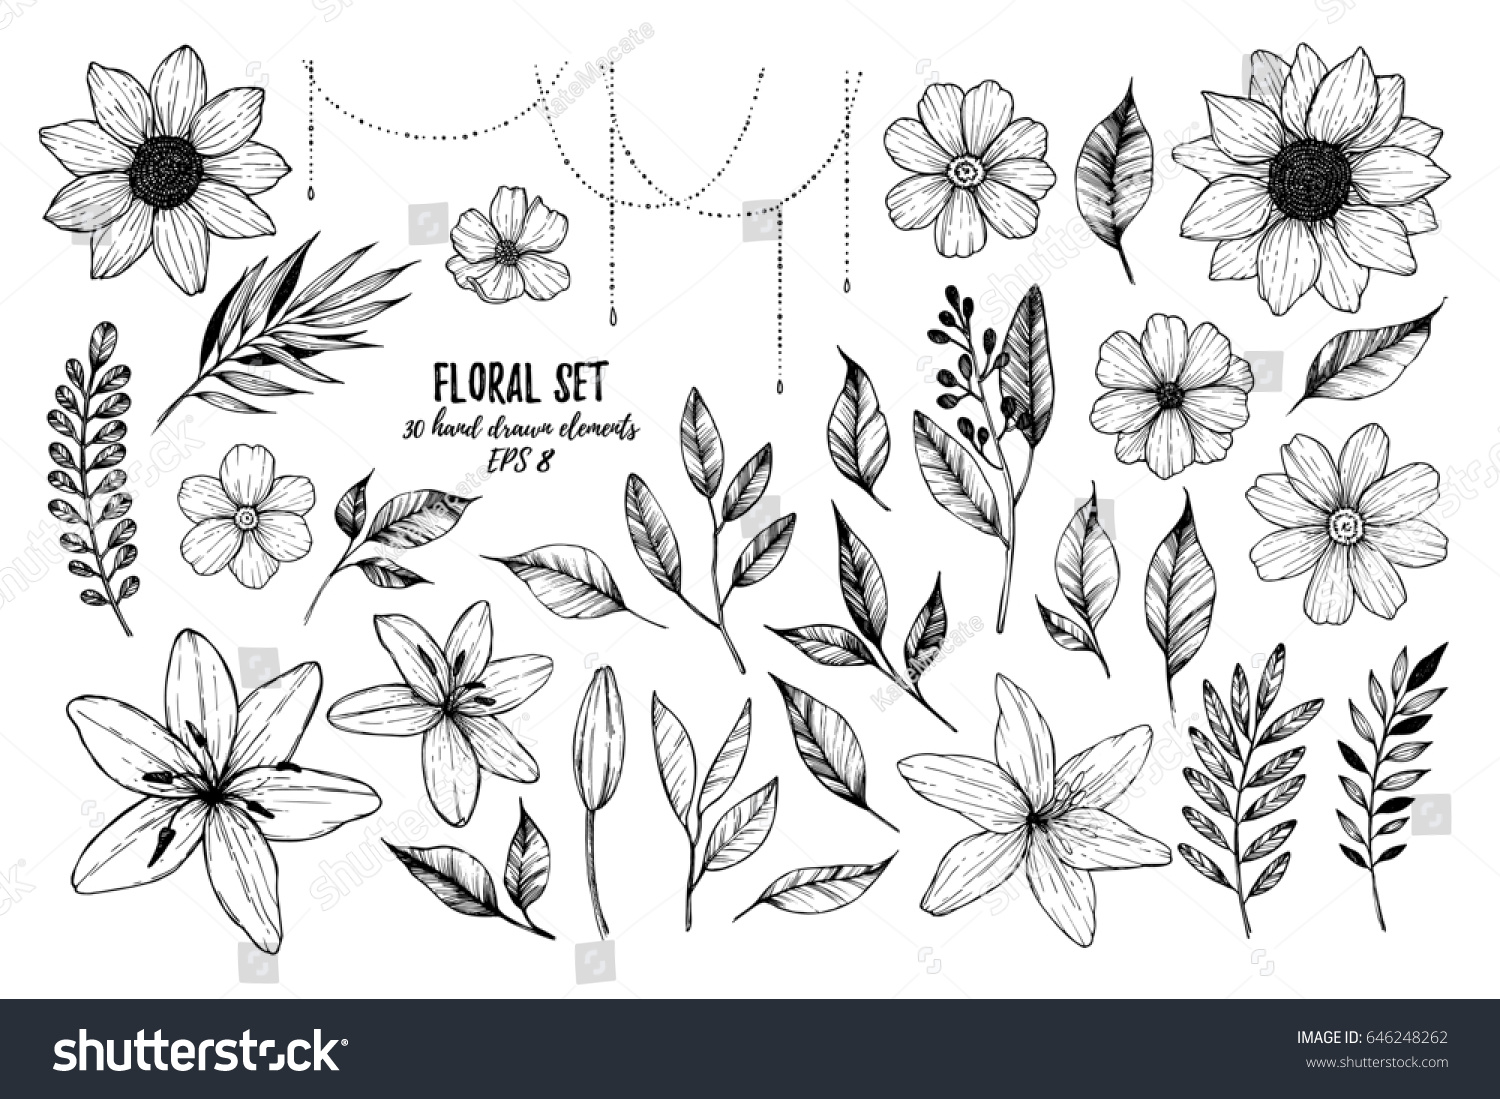 Vector illustrations - Floral set (flowers, leaves and branches). 30 hand drawn design elements in sketch style.  Perfect for invitations, greeting cards, tattoo, prints etc #646248262